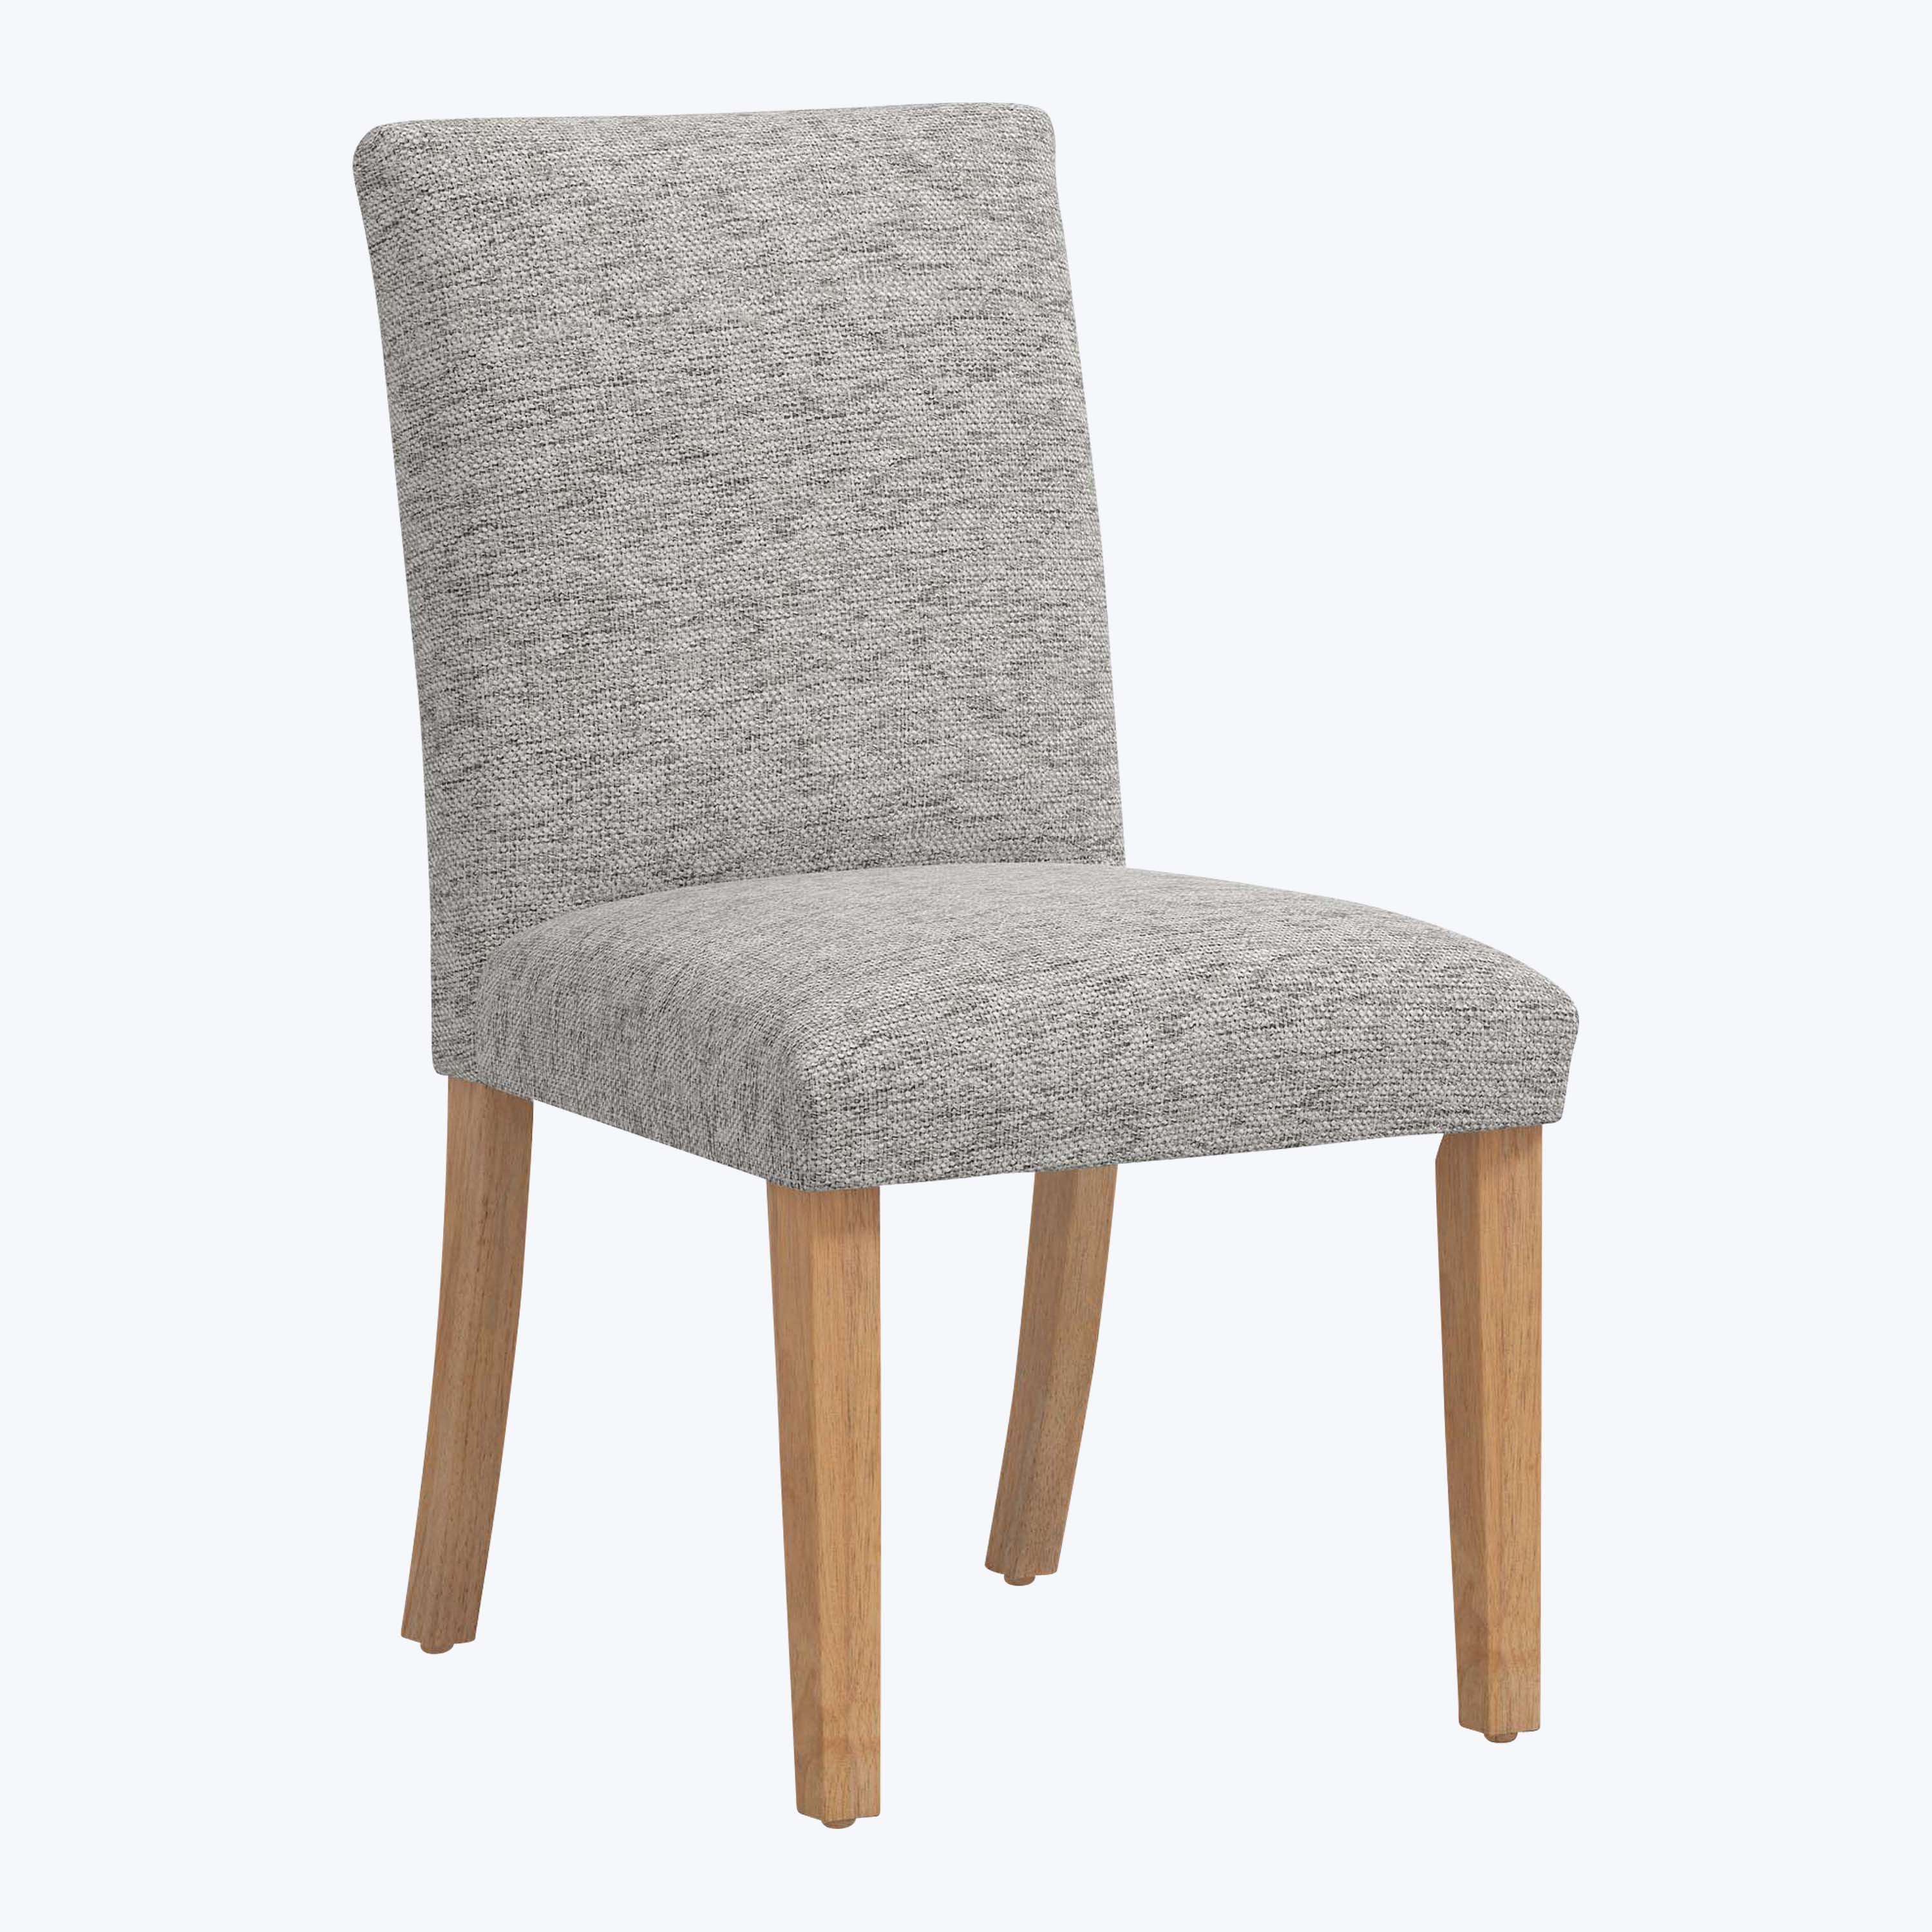 Kristy Dining Chair